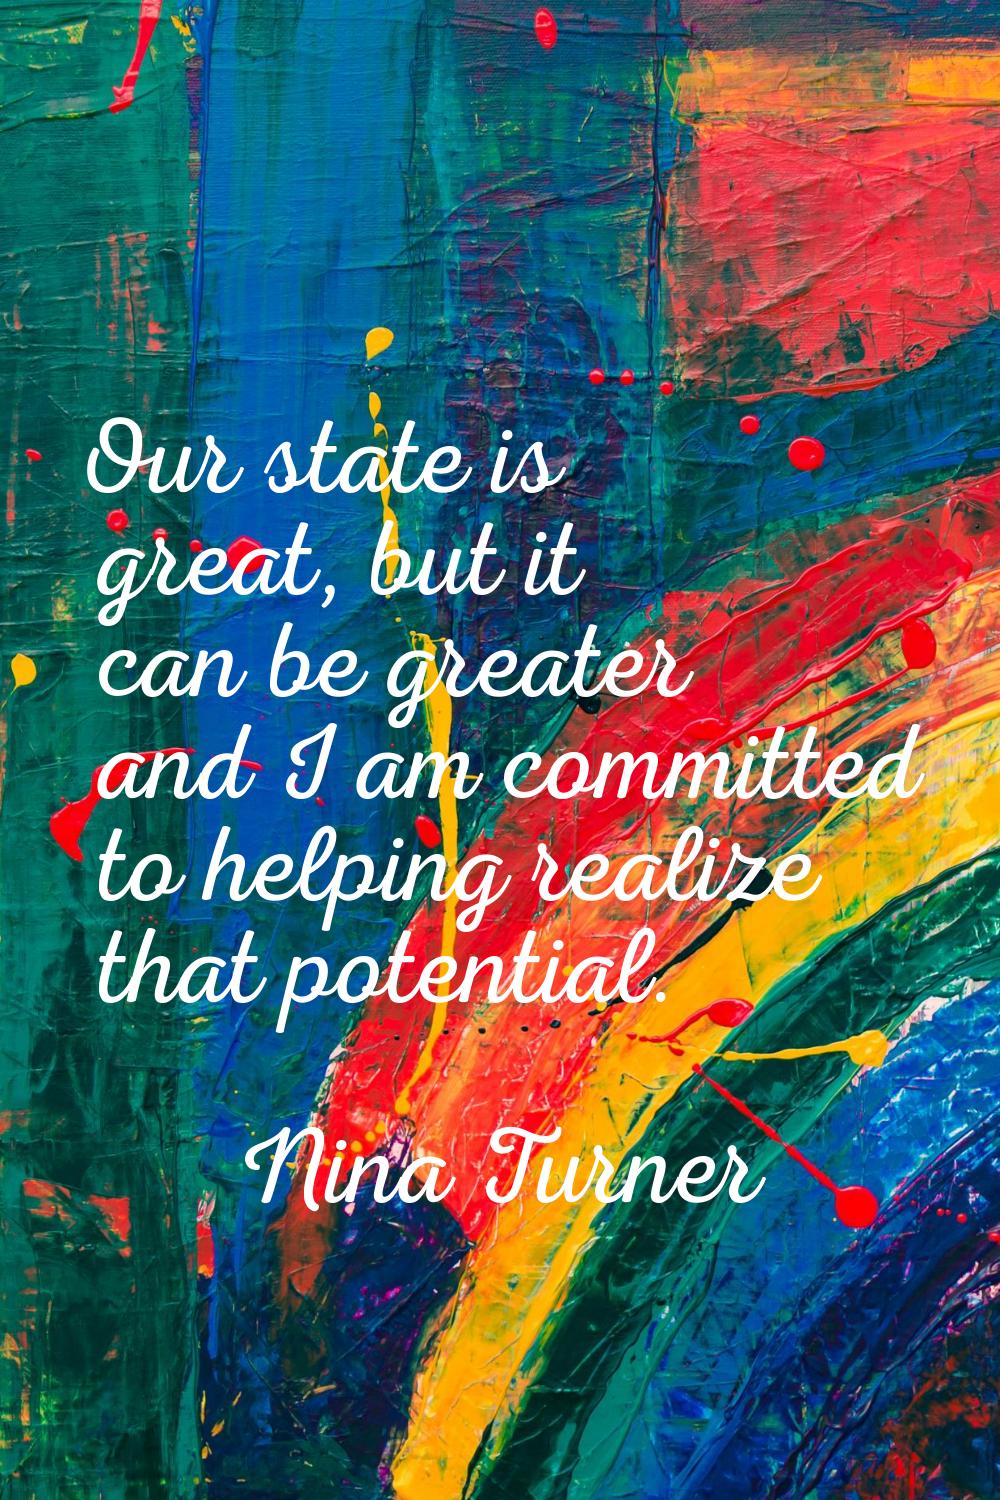 Our state is great, but it can be greater and I am committed to helping realize that potential.